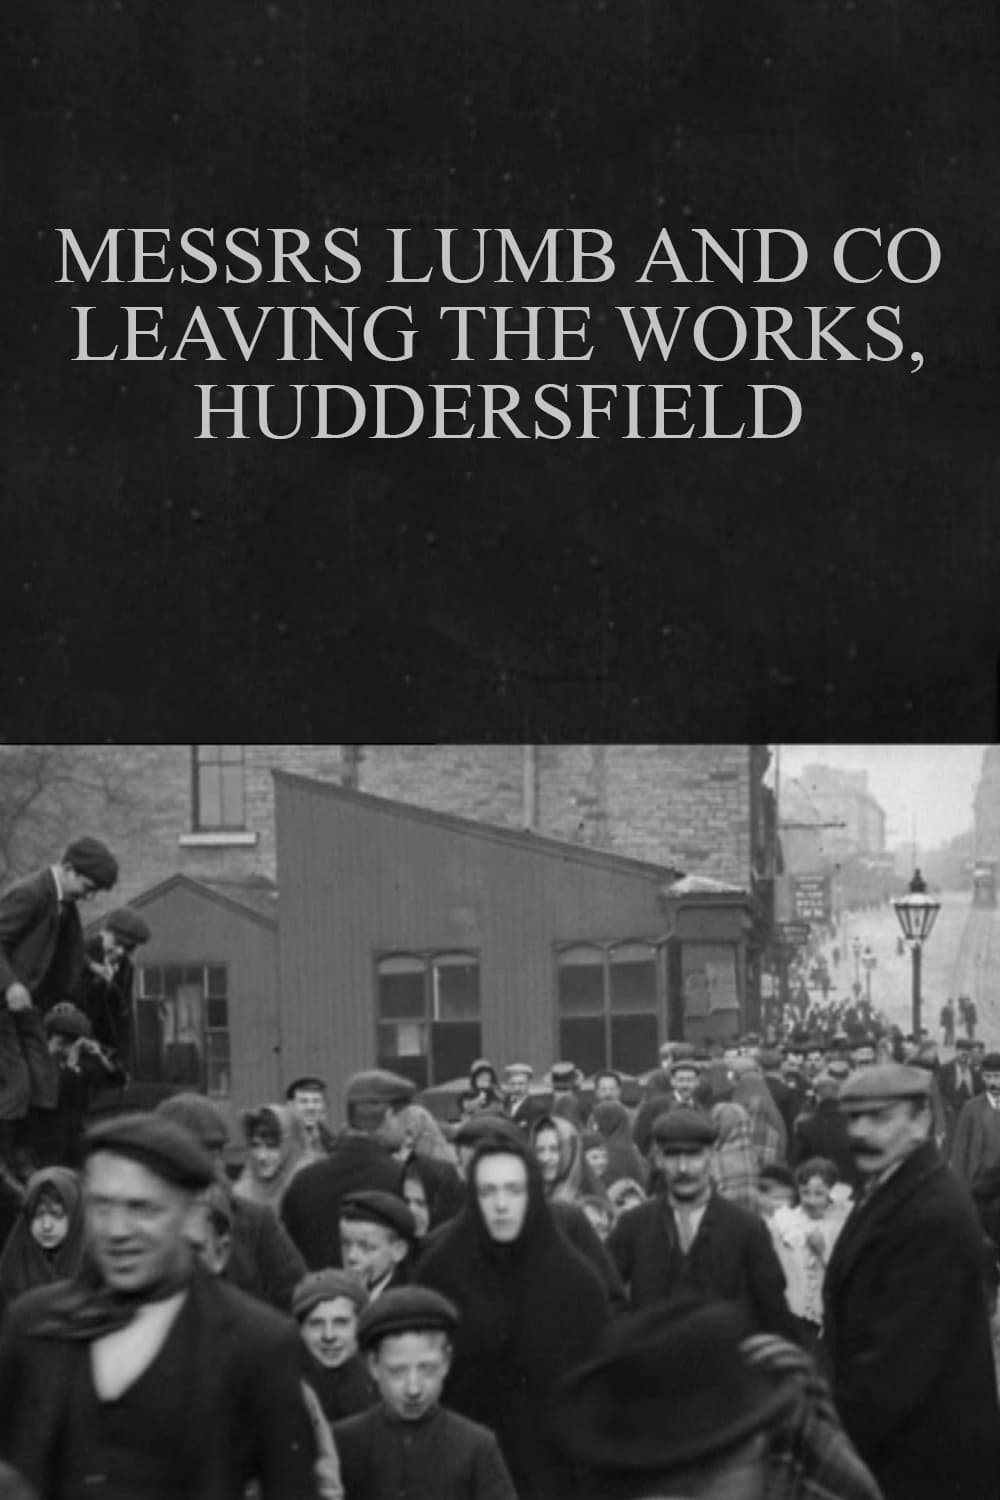 Messrs Lumb and Co Leaving the Works, Huddersfield